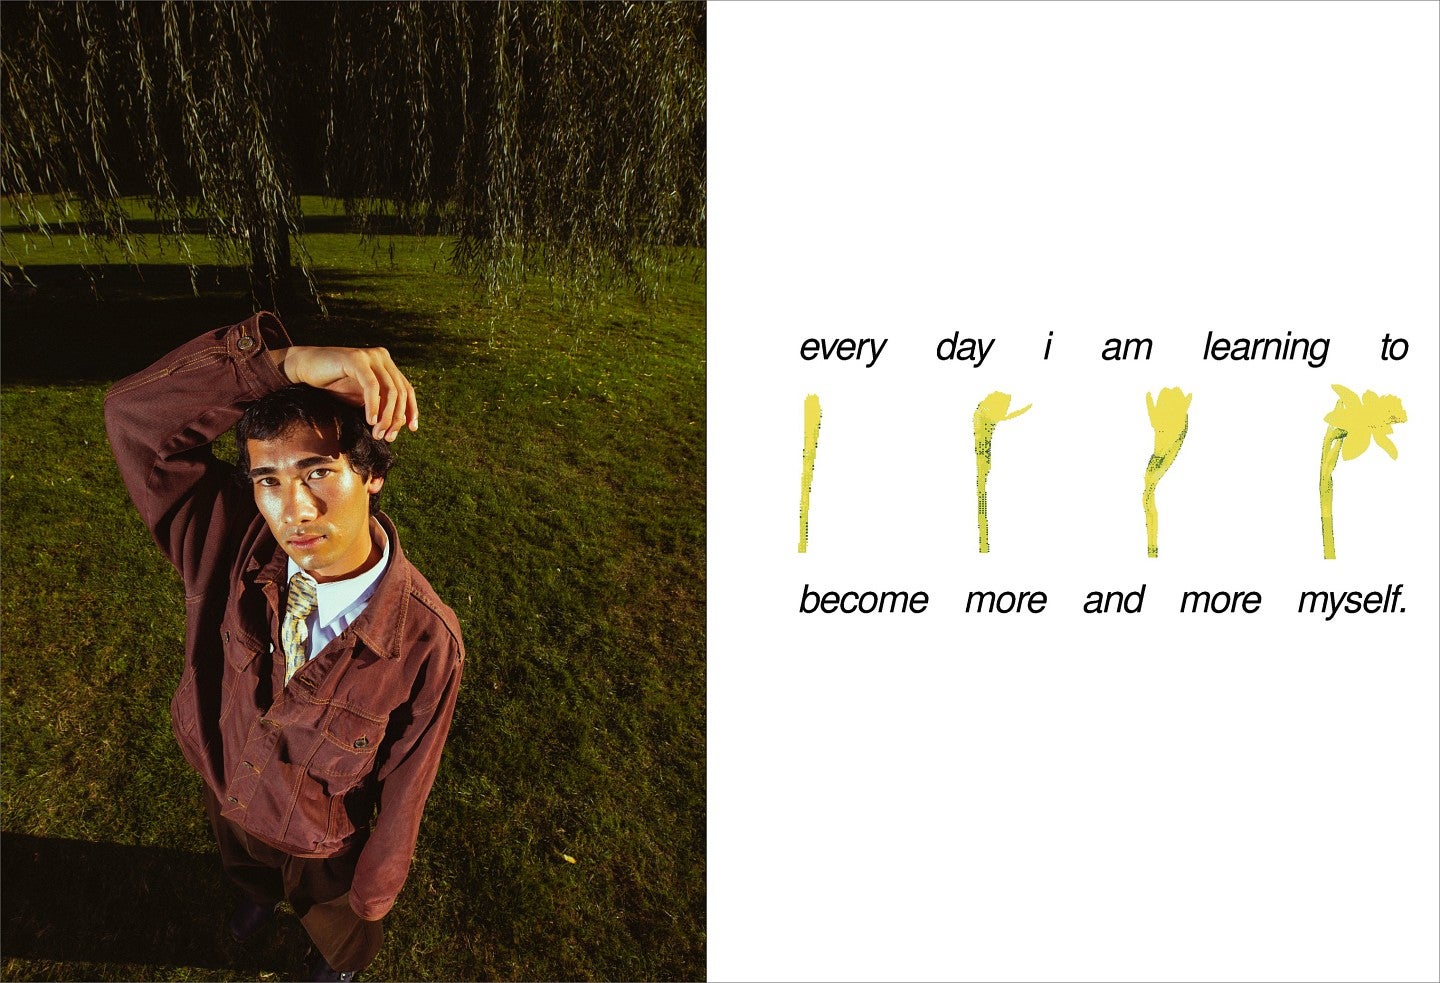 magazine spread from The Garden by Charlie Nguyen with the headline "every day i am learning to become more and more myself."